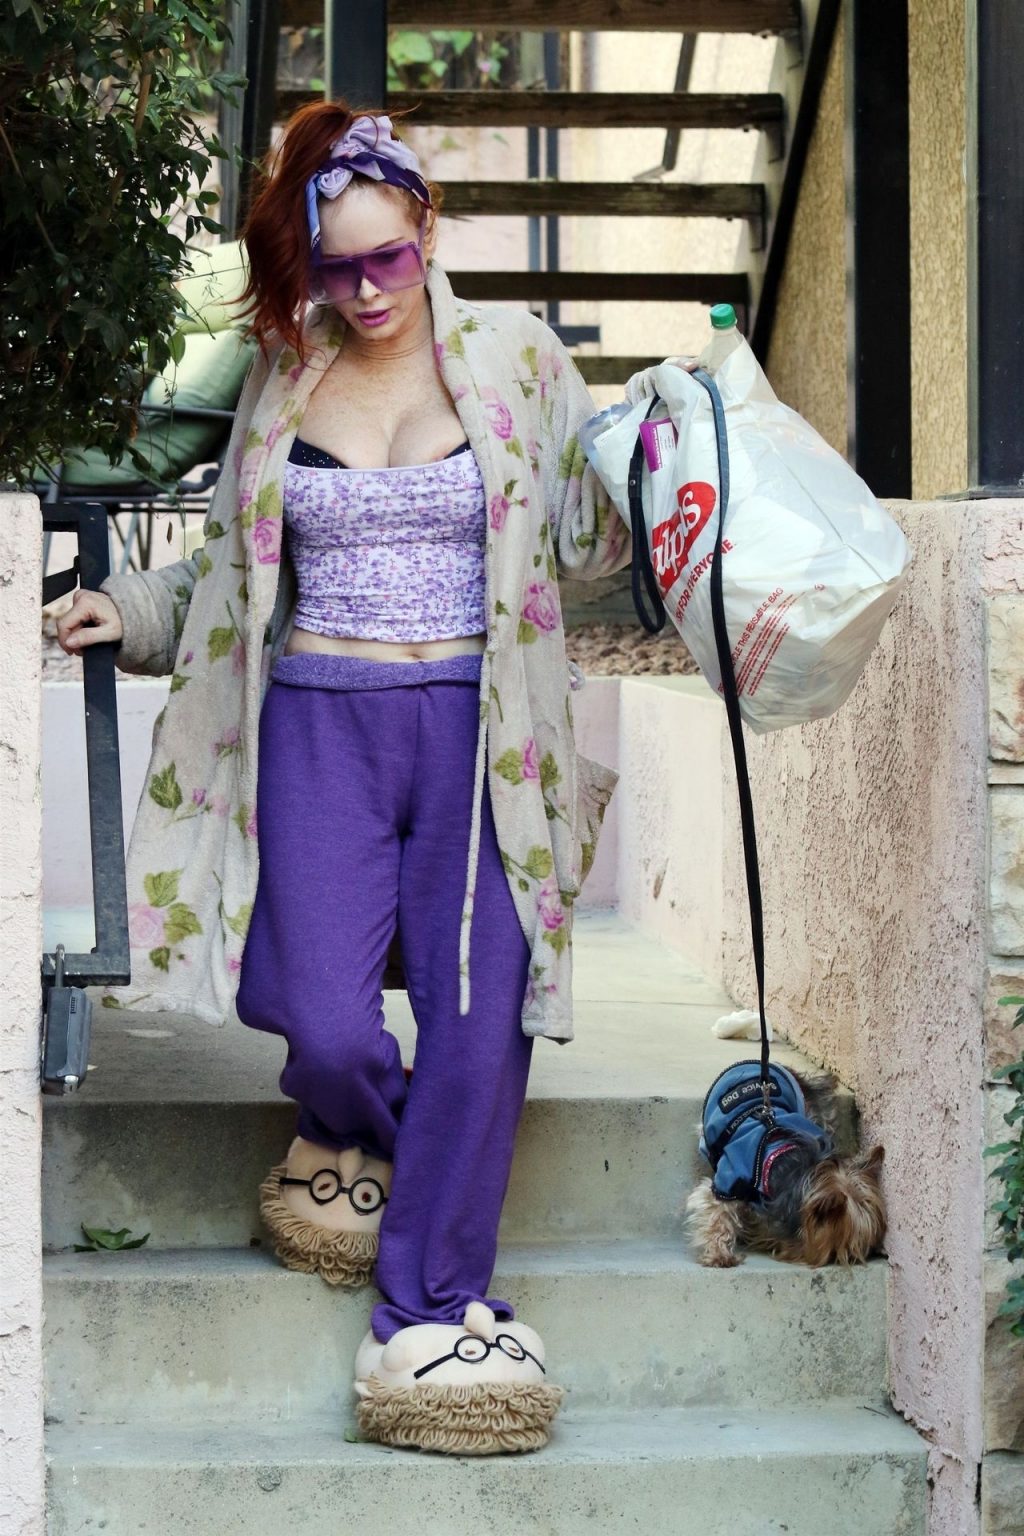 Phoebe Price is Seen Taking the Trash Out (41 Photos)